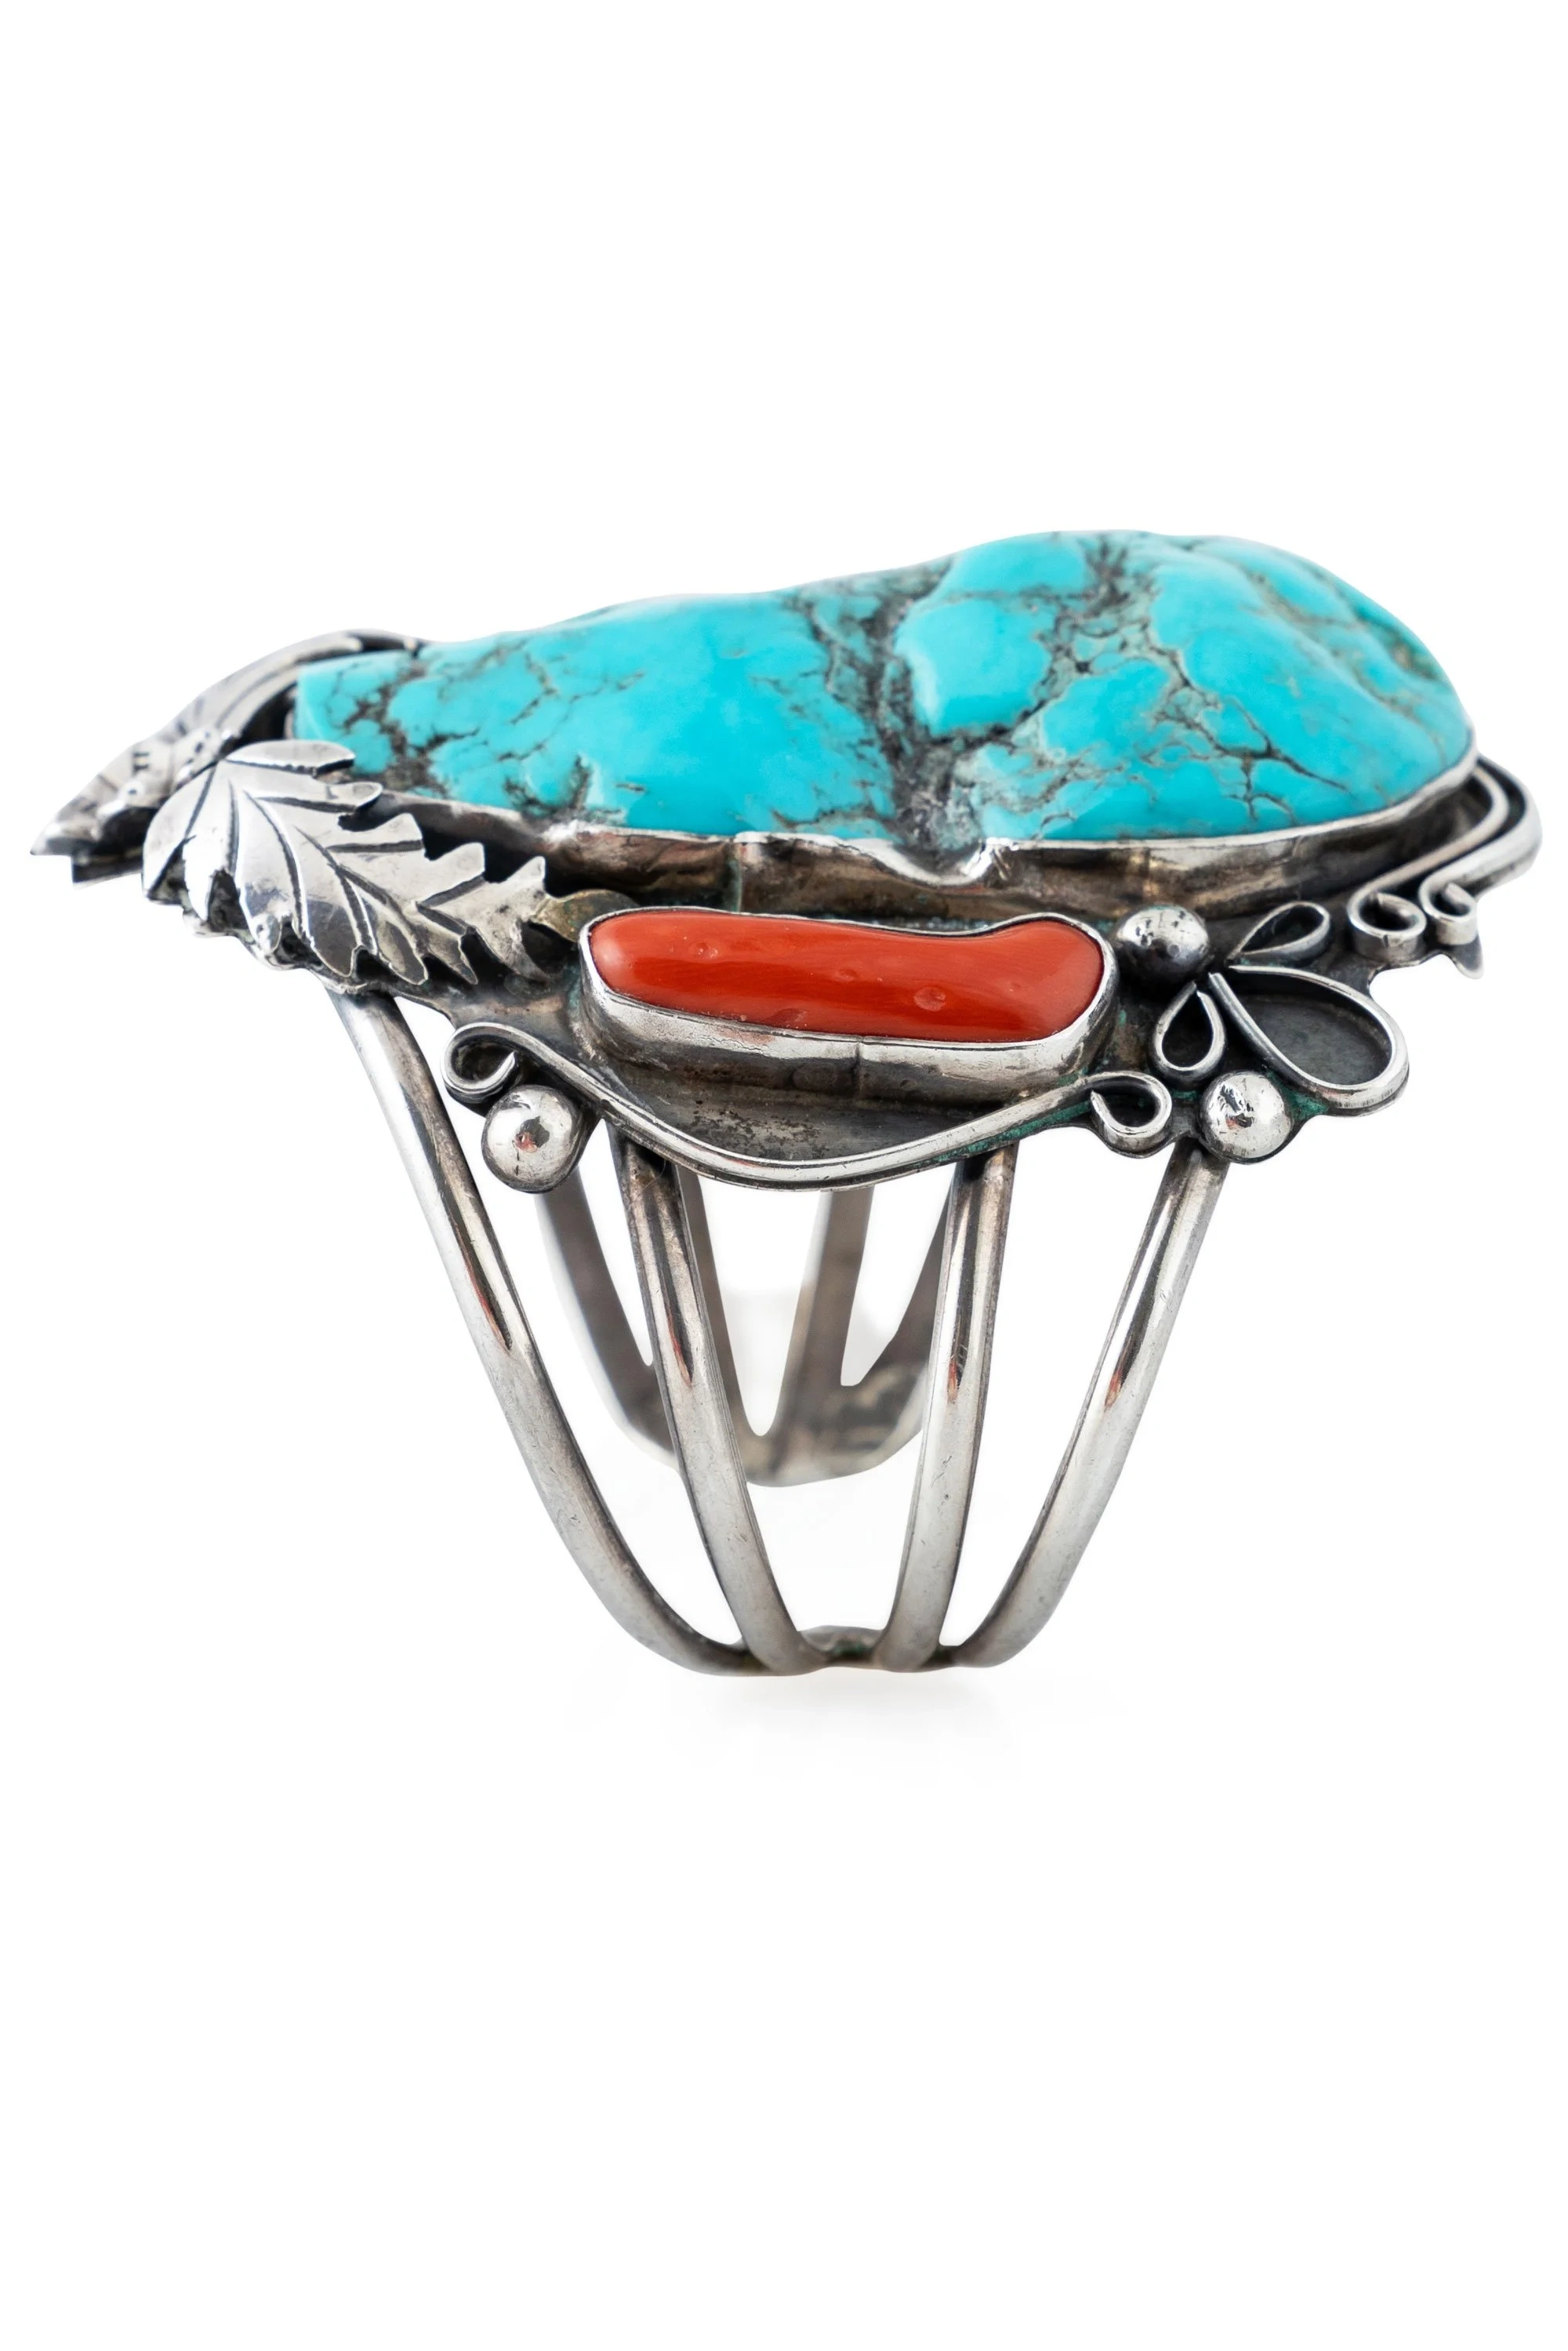 Cuff, Turquoise & Coral, Statement, Vintage, 2684